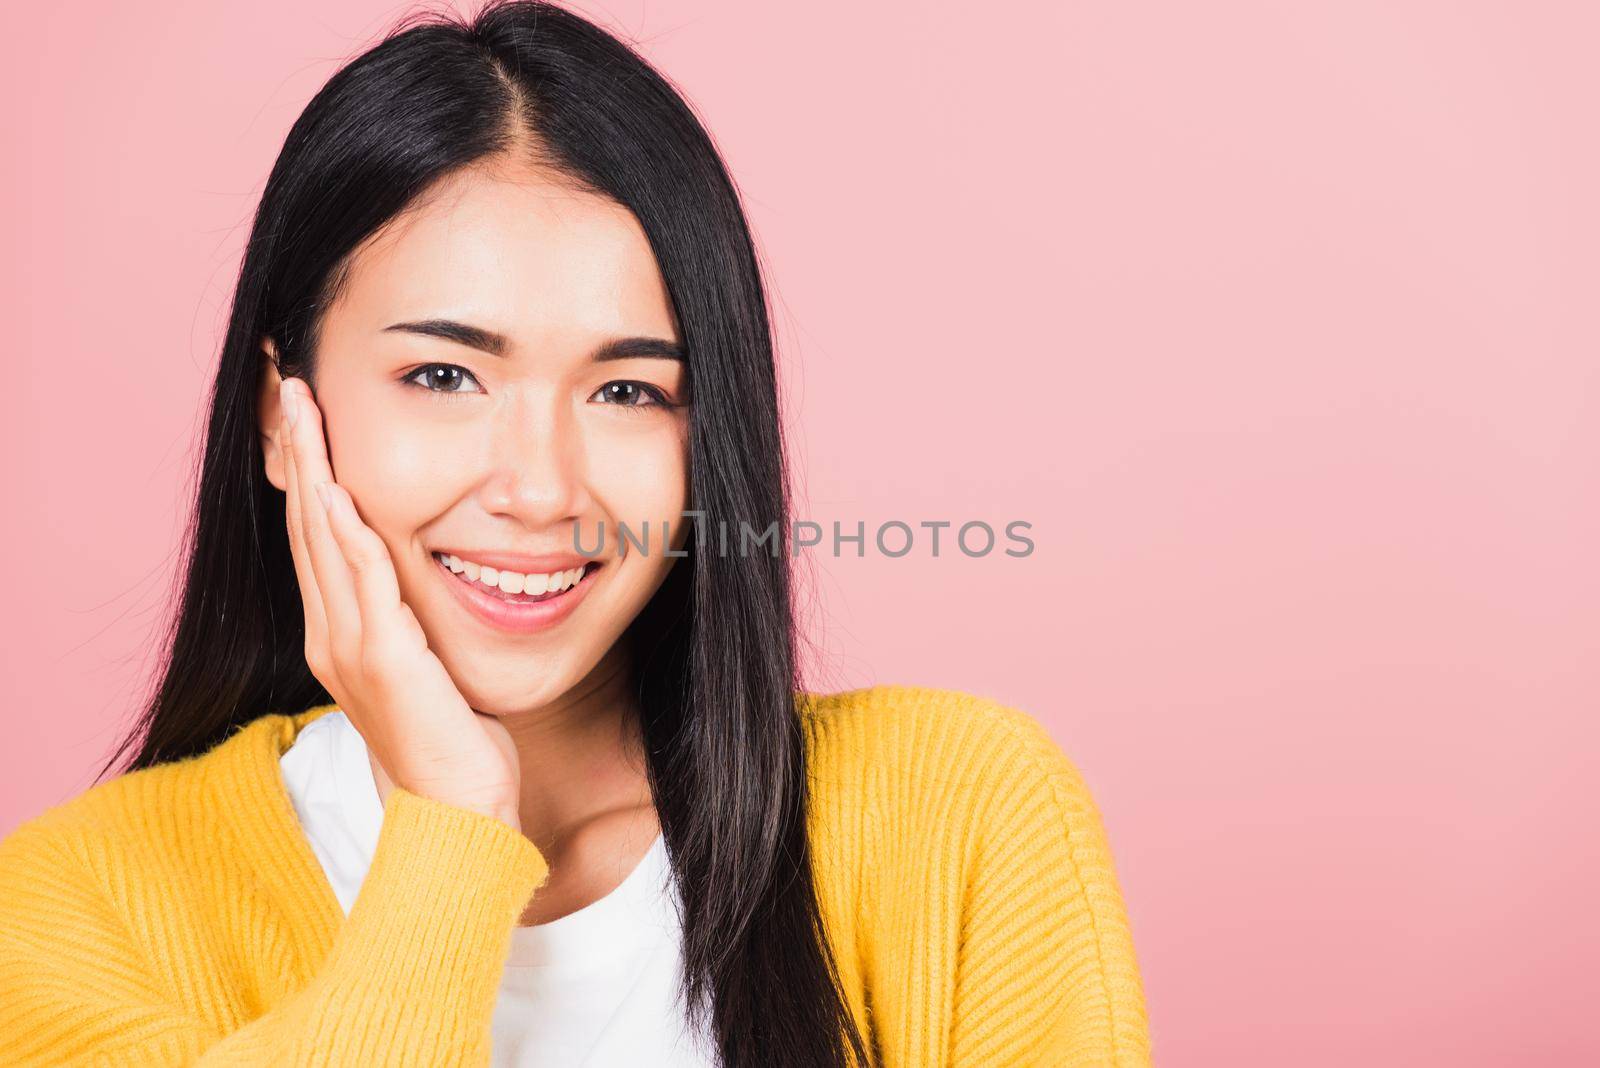 Happy Asian portrait beauty cute young woman teen smiling white teeth surprised excited celebrating gesturing palms on face studio shot isolated on pink background